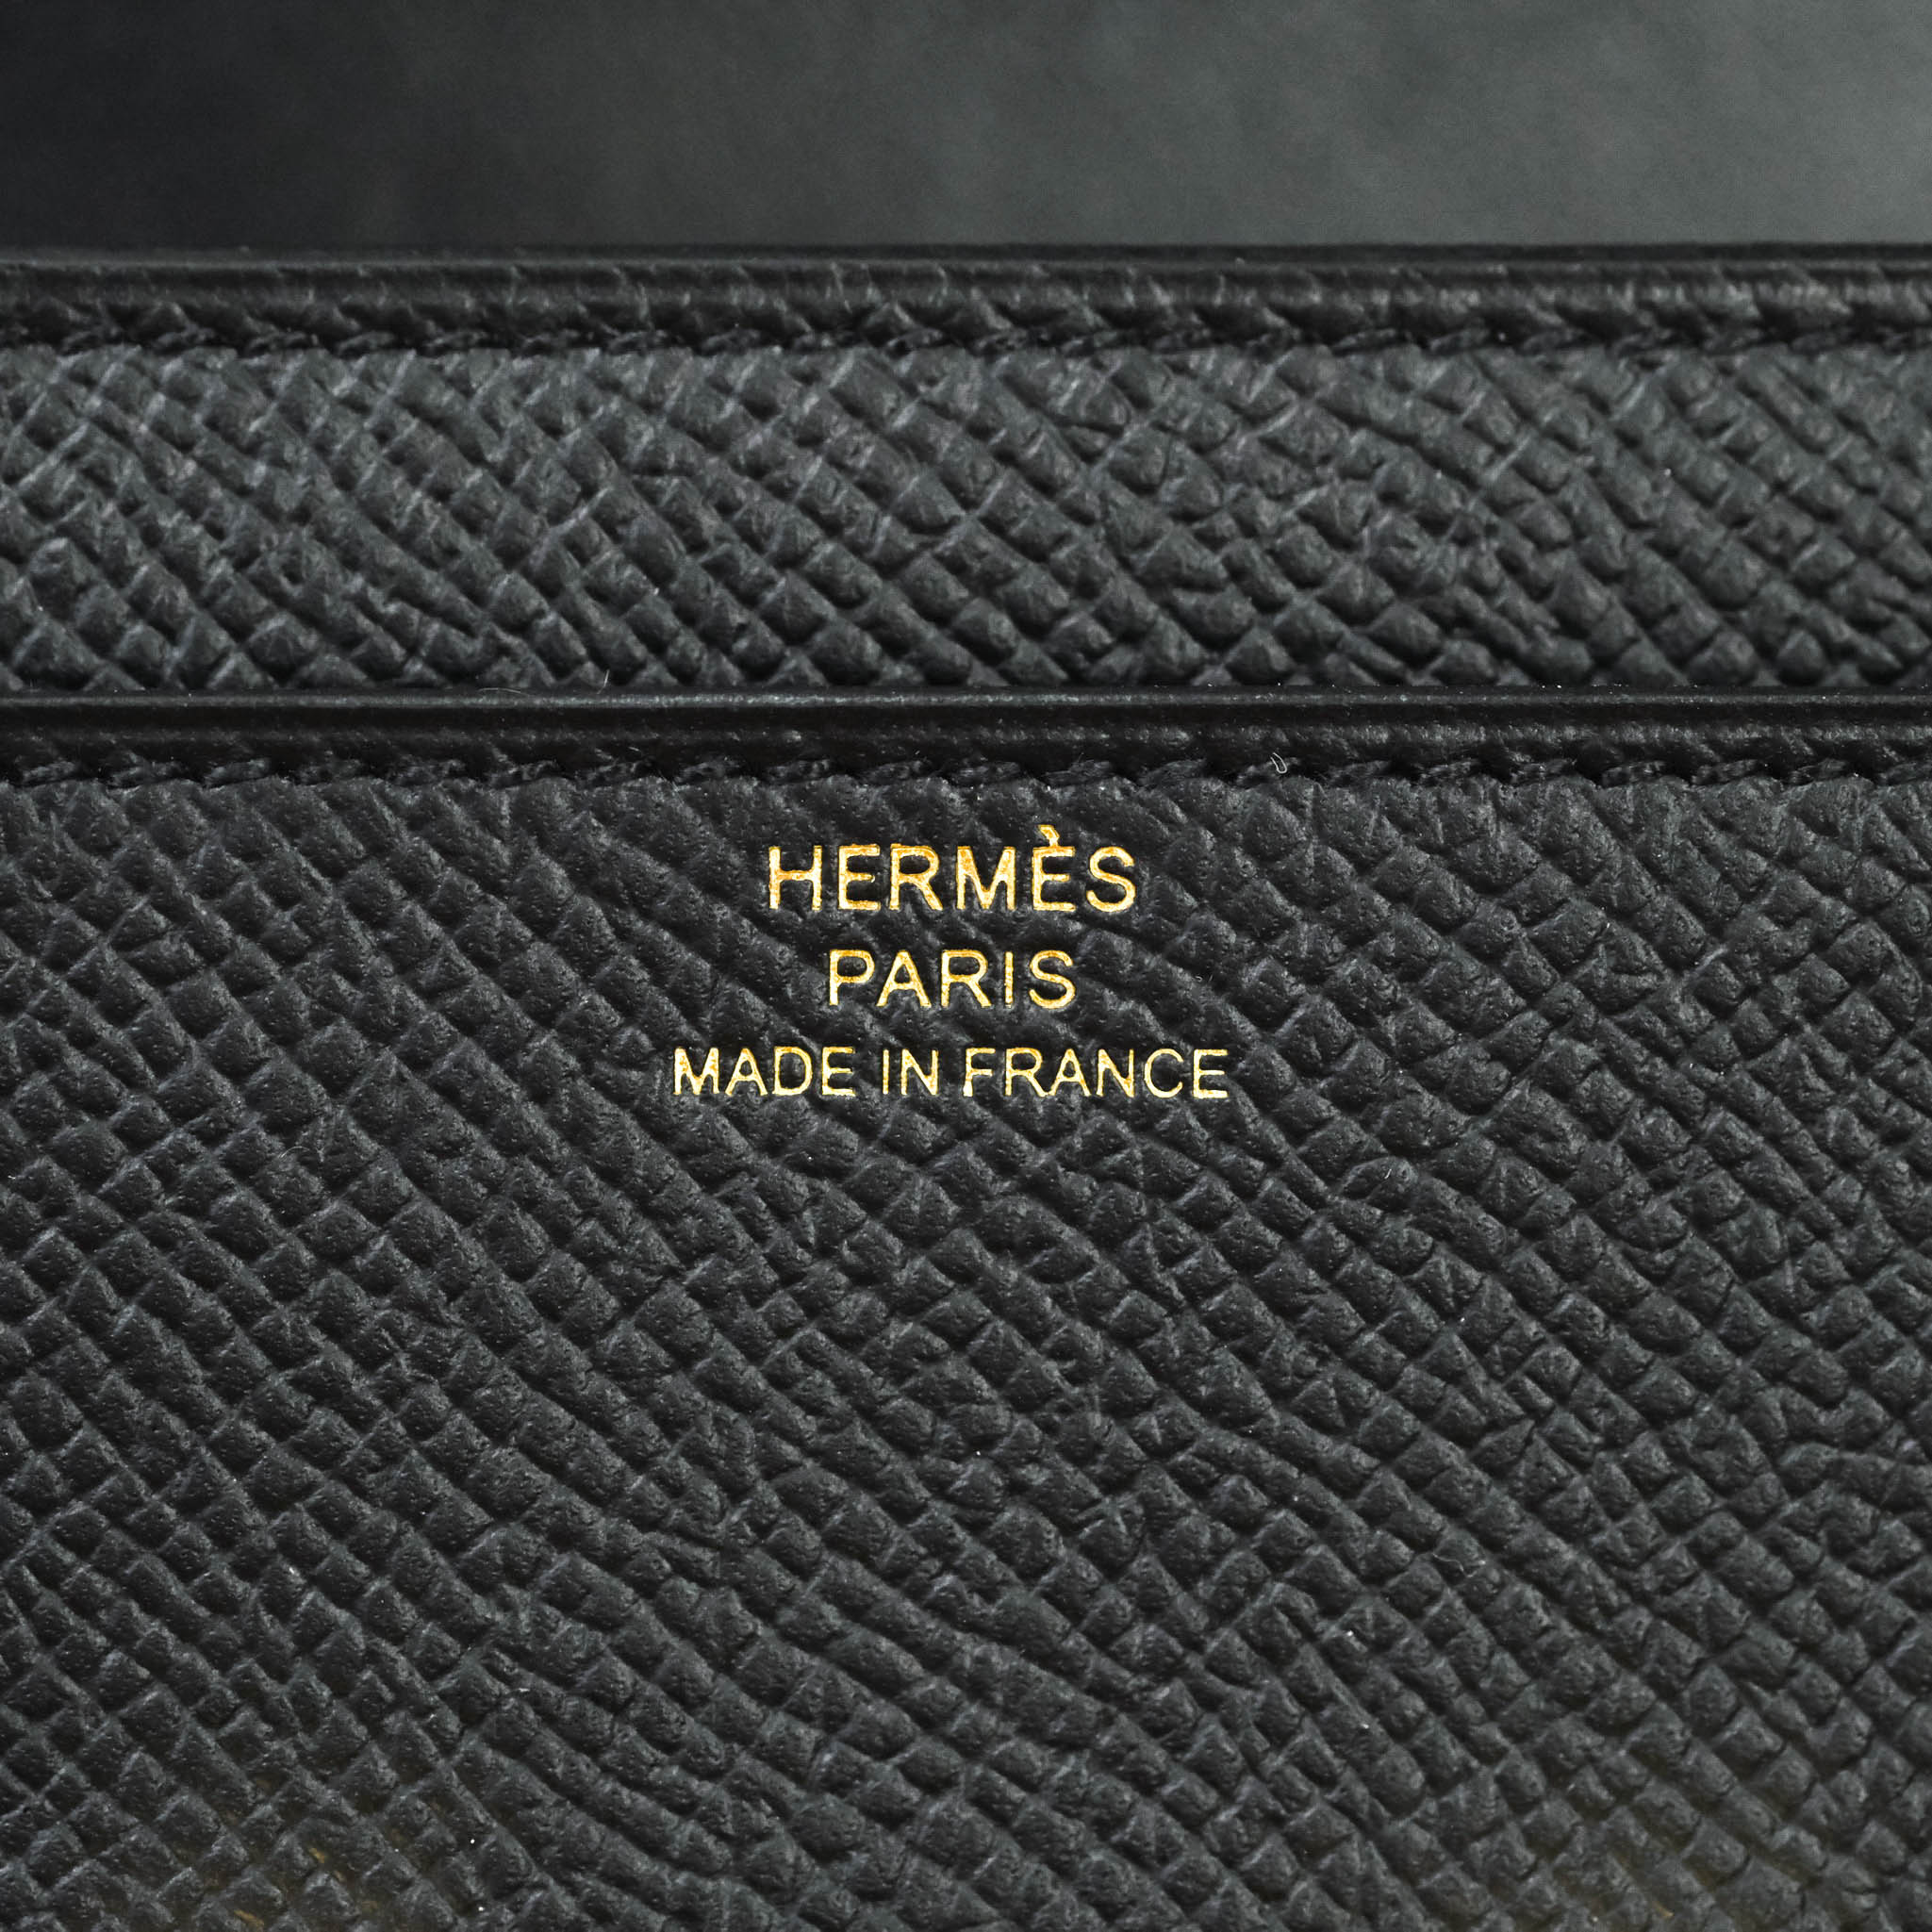 Hermès Constance 18 Rouge Casaque Gold Hardware⁣ – Coco Approved Studio